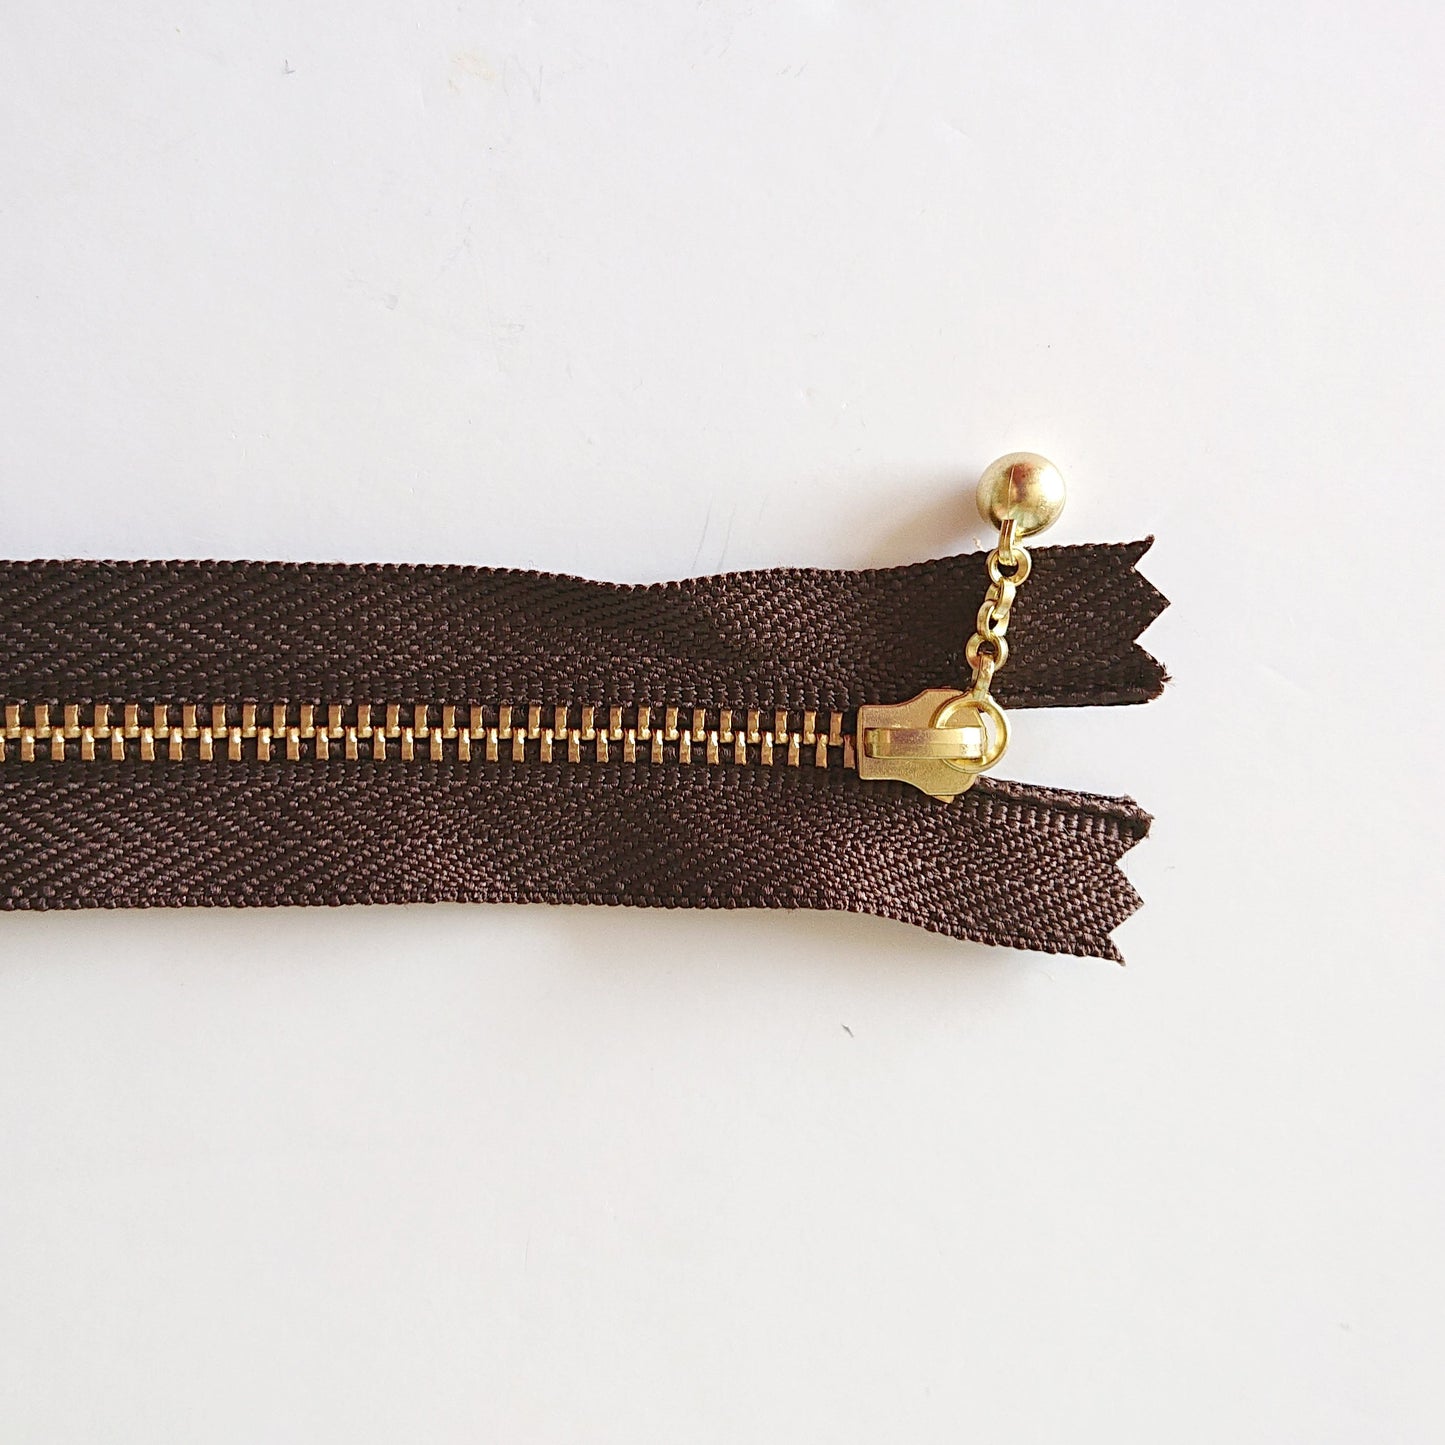 YKK Metalic Zippers with Water-drop Pull - Dark Brown (30CM/12inches)